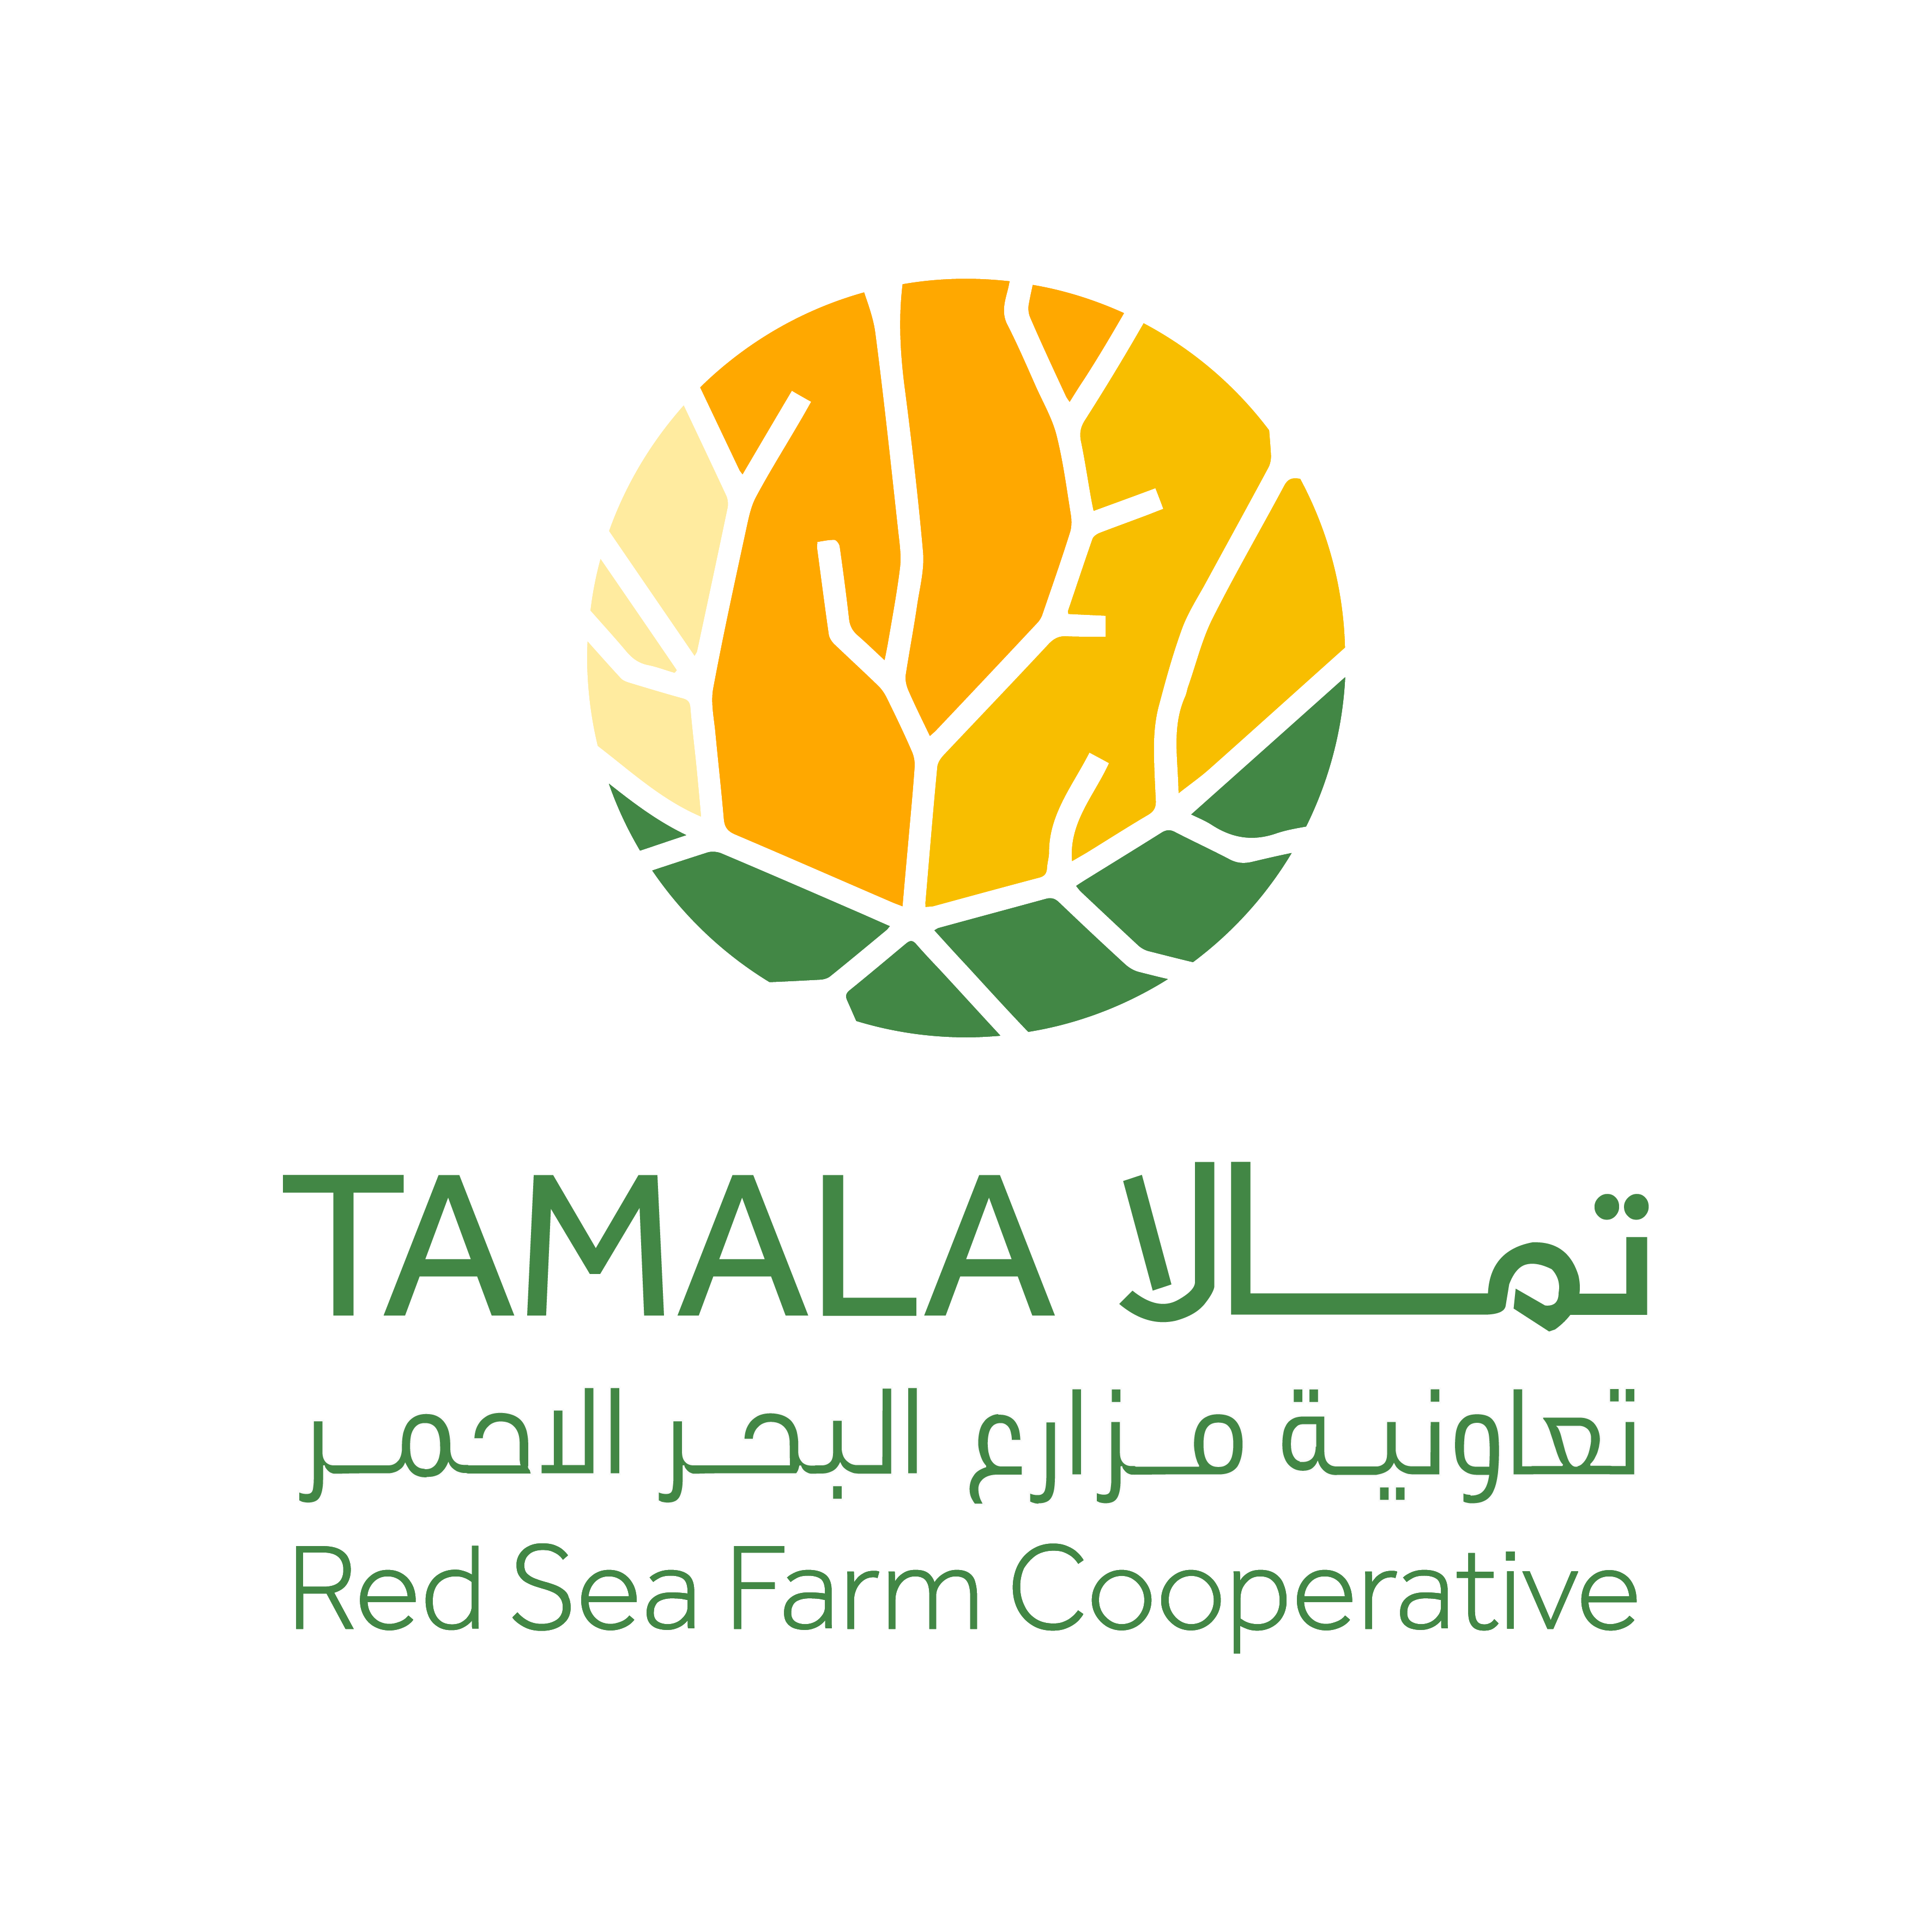 Red Sea Global launches The Red Sea Farm Cooperative to transform agricultural economy in Tabuk region